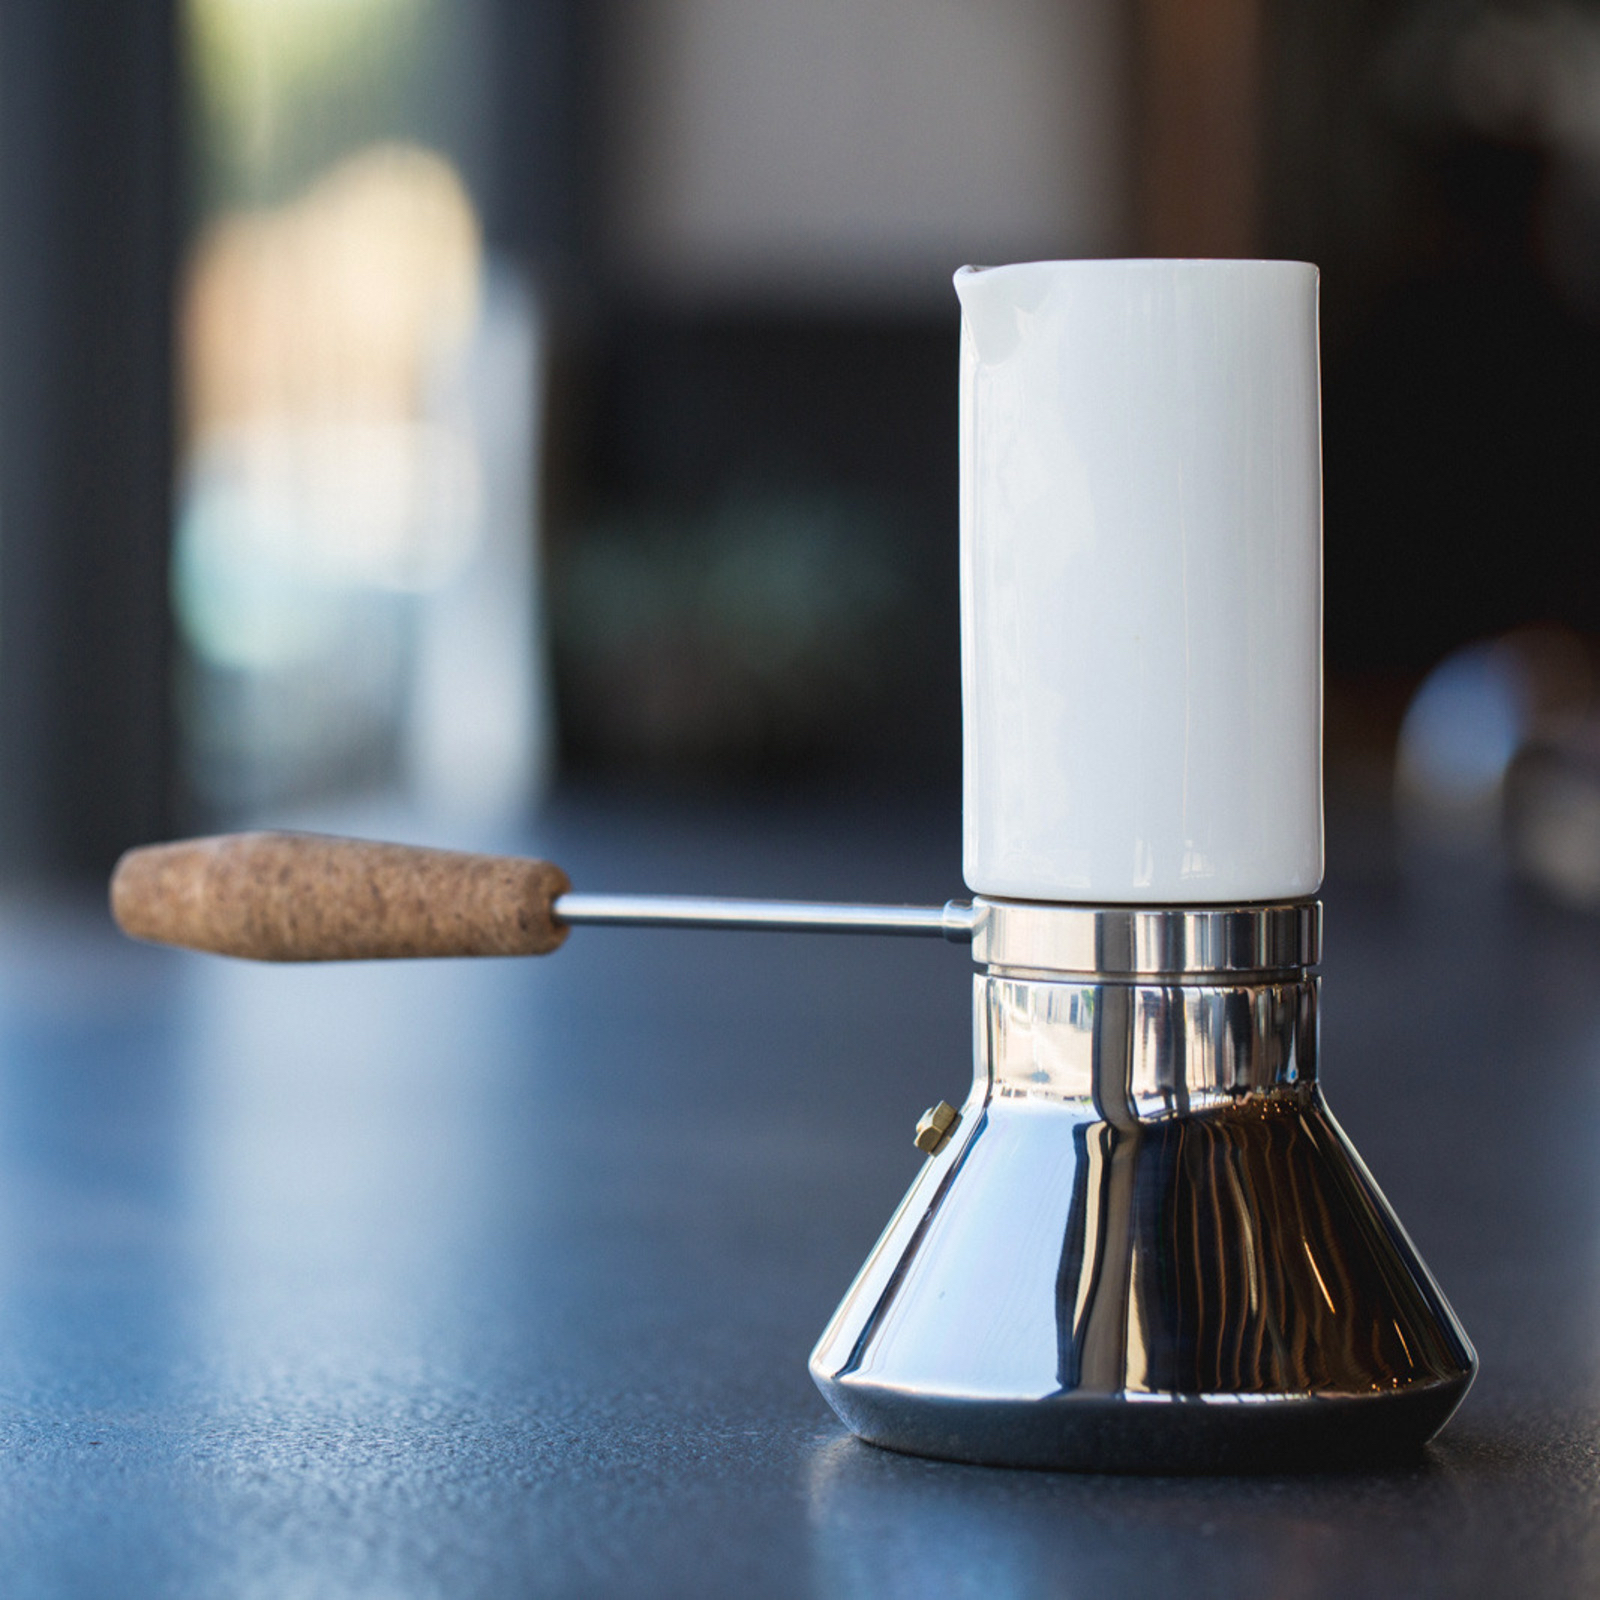 Joey Roth and Blue Bottle Collaborate to create the mokapot